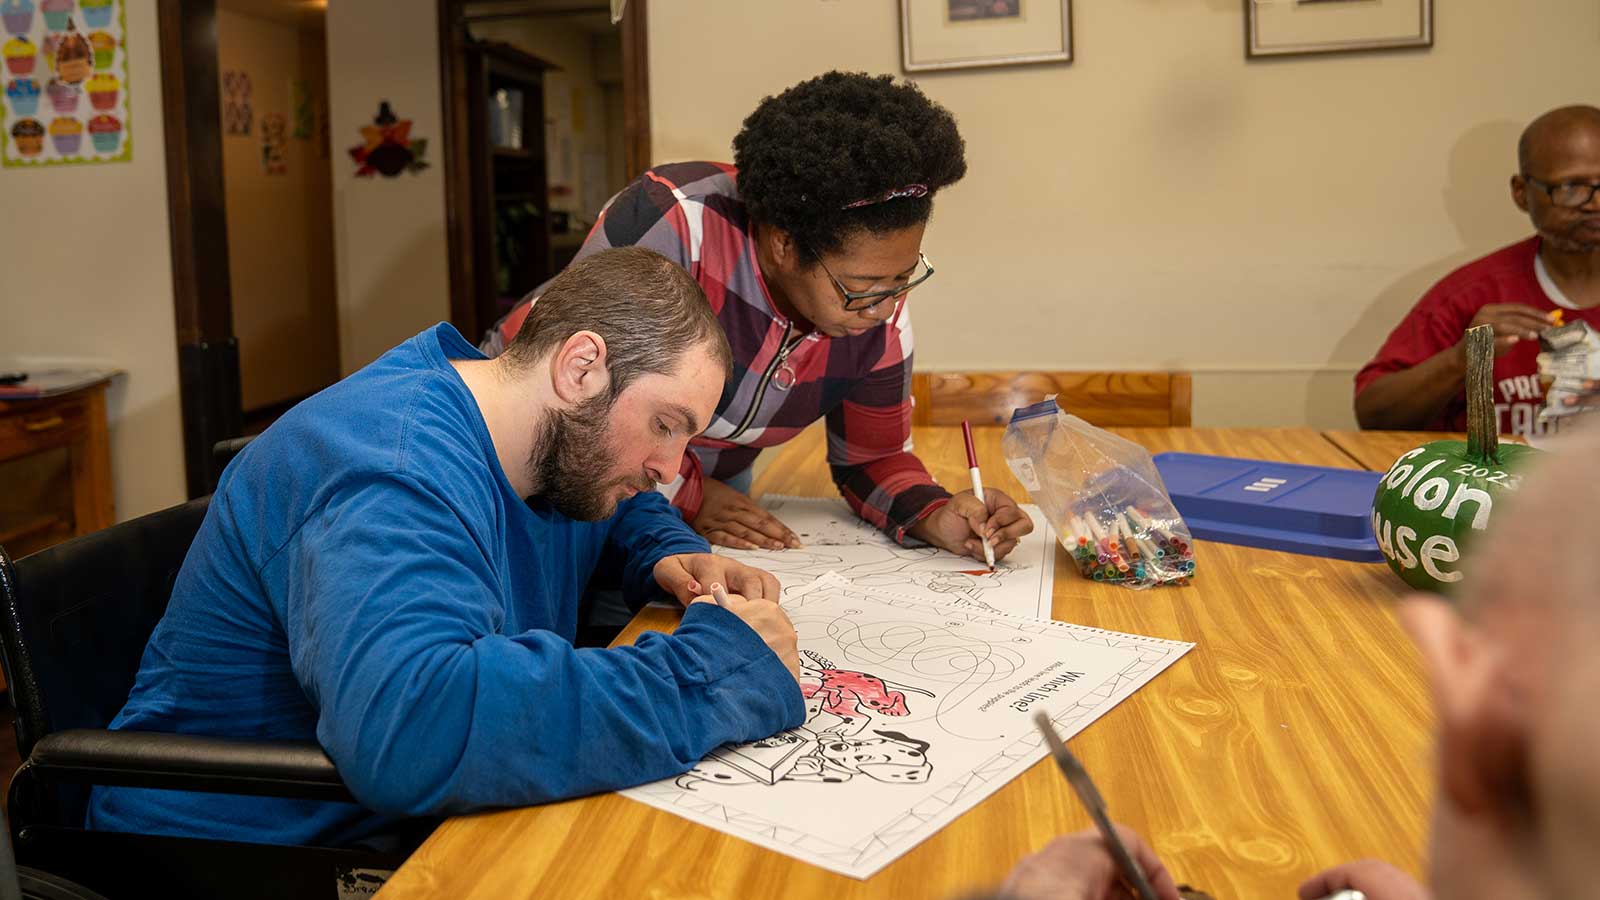 A non-profit worker helps a client with intellectual and developmental disabilities.